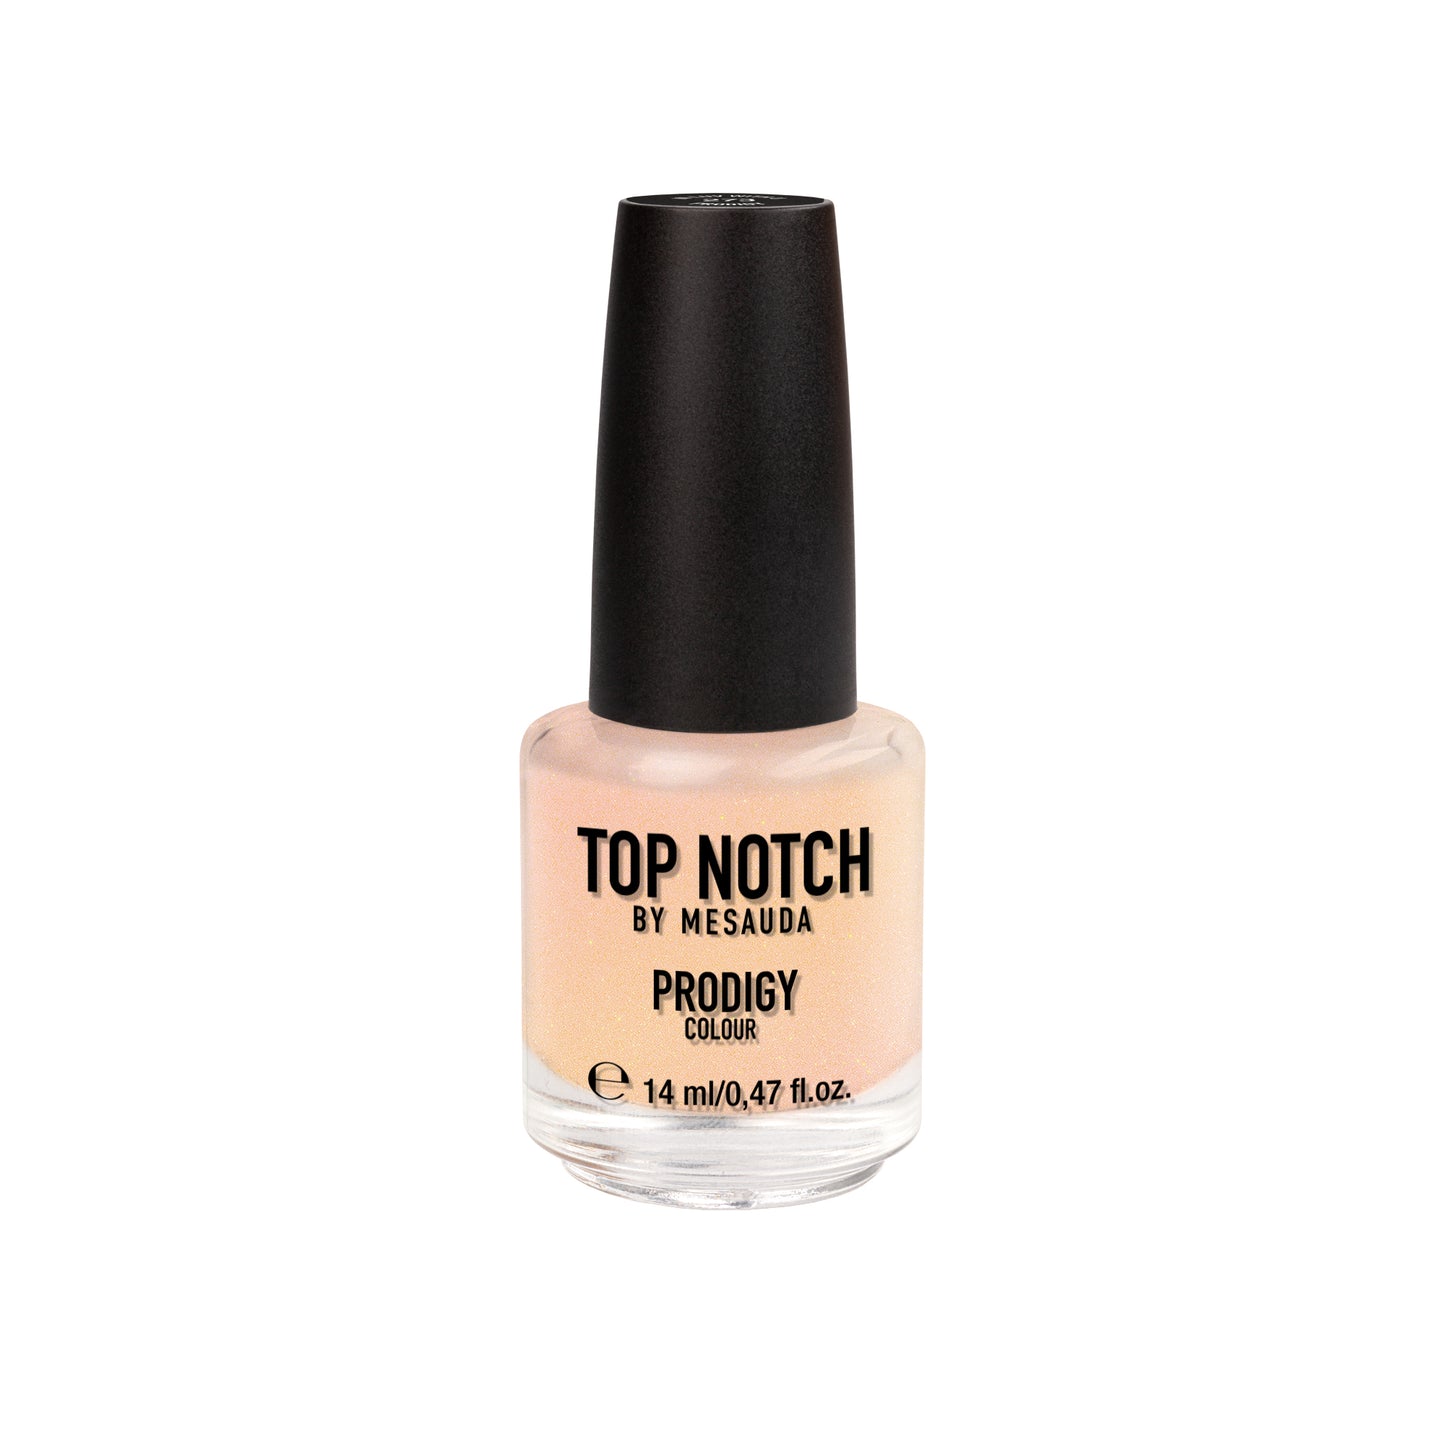 Mesauda - Top Notch Prodigy - Modern Romance Collection  - #273 In Luv With U 14ml